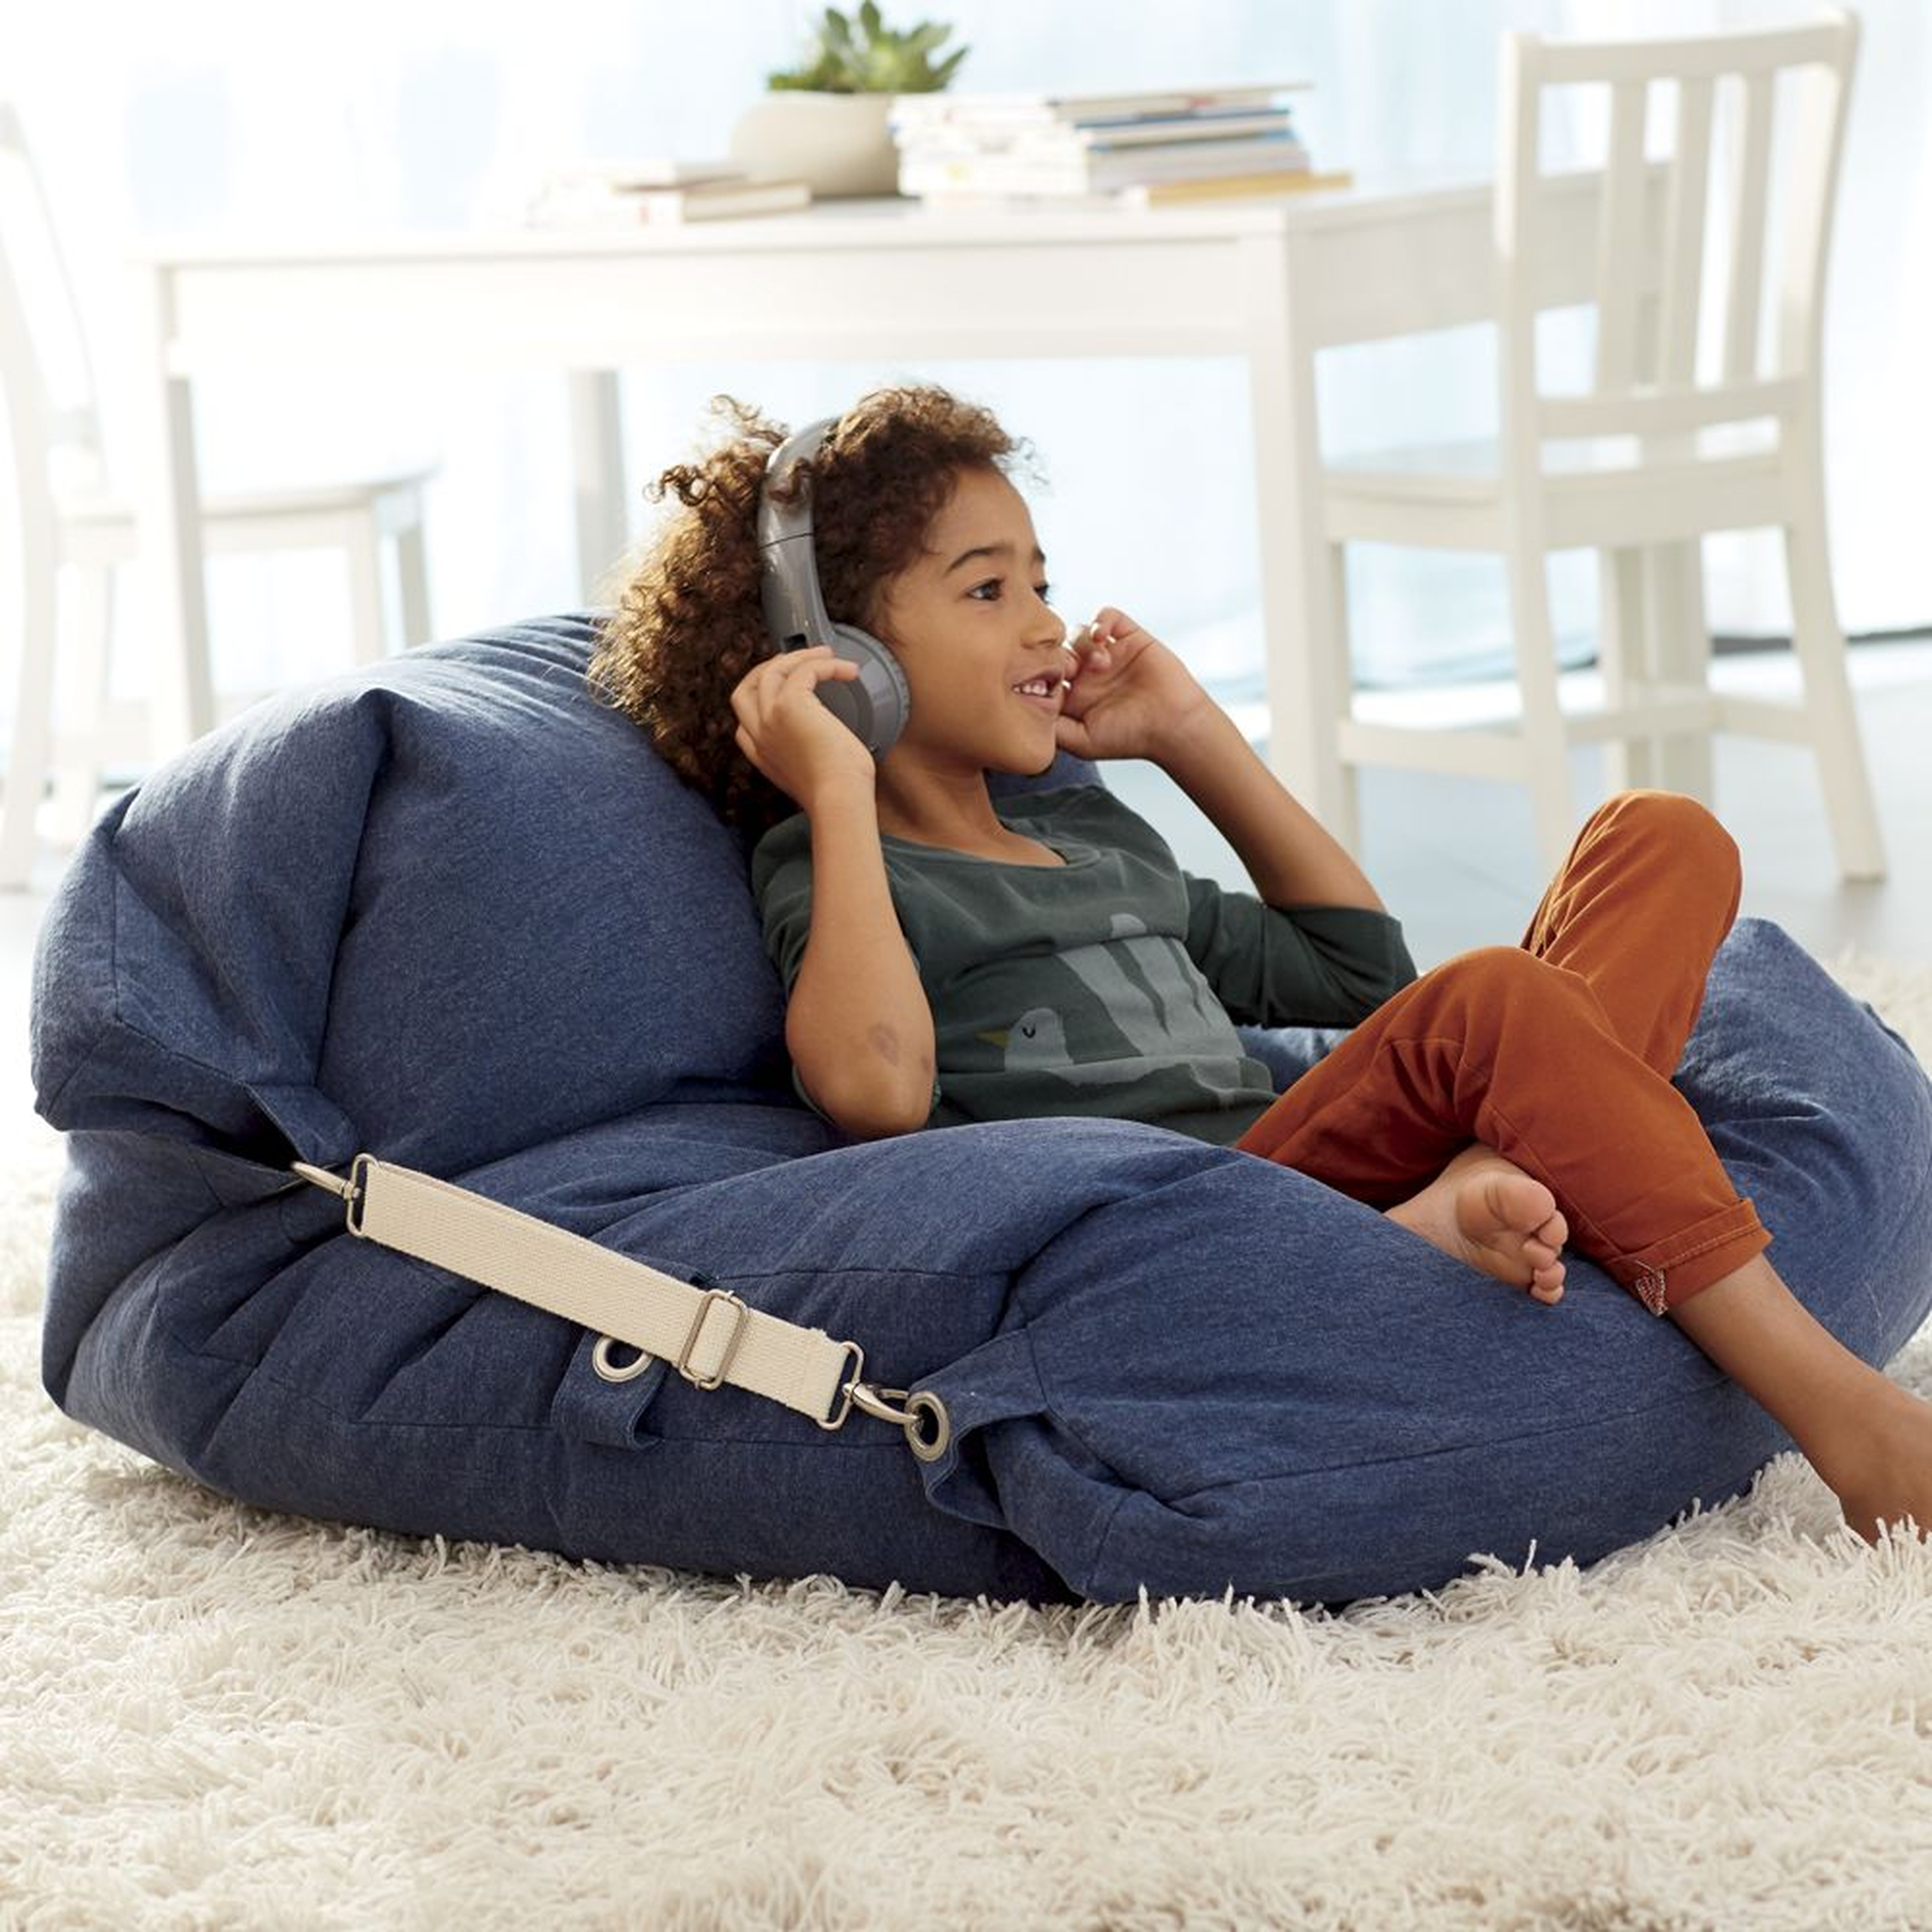 Adjustable Blue Bean Bag Chair - Crate and Barrel